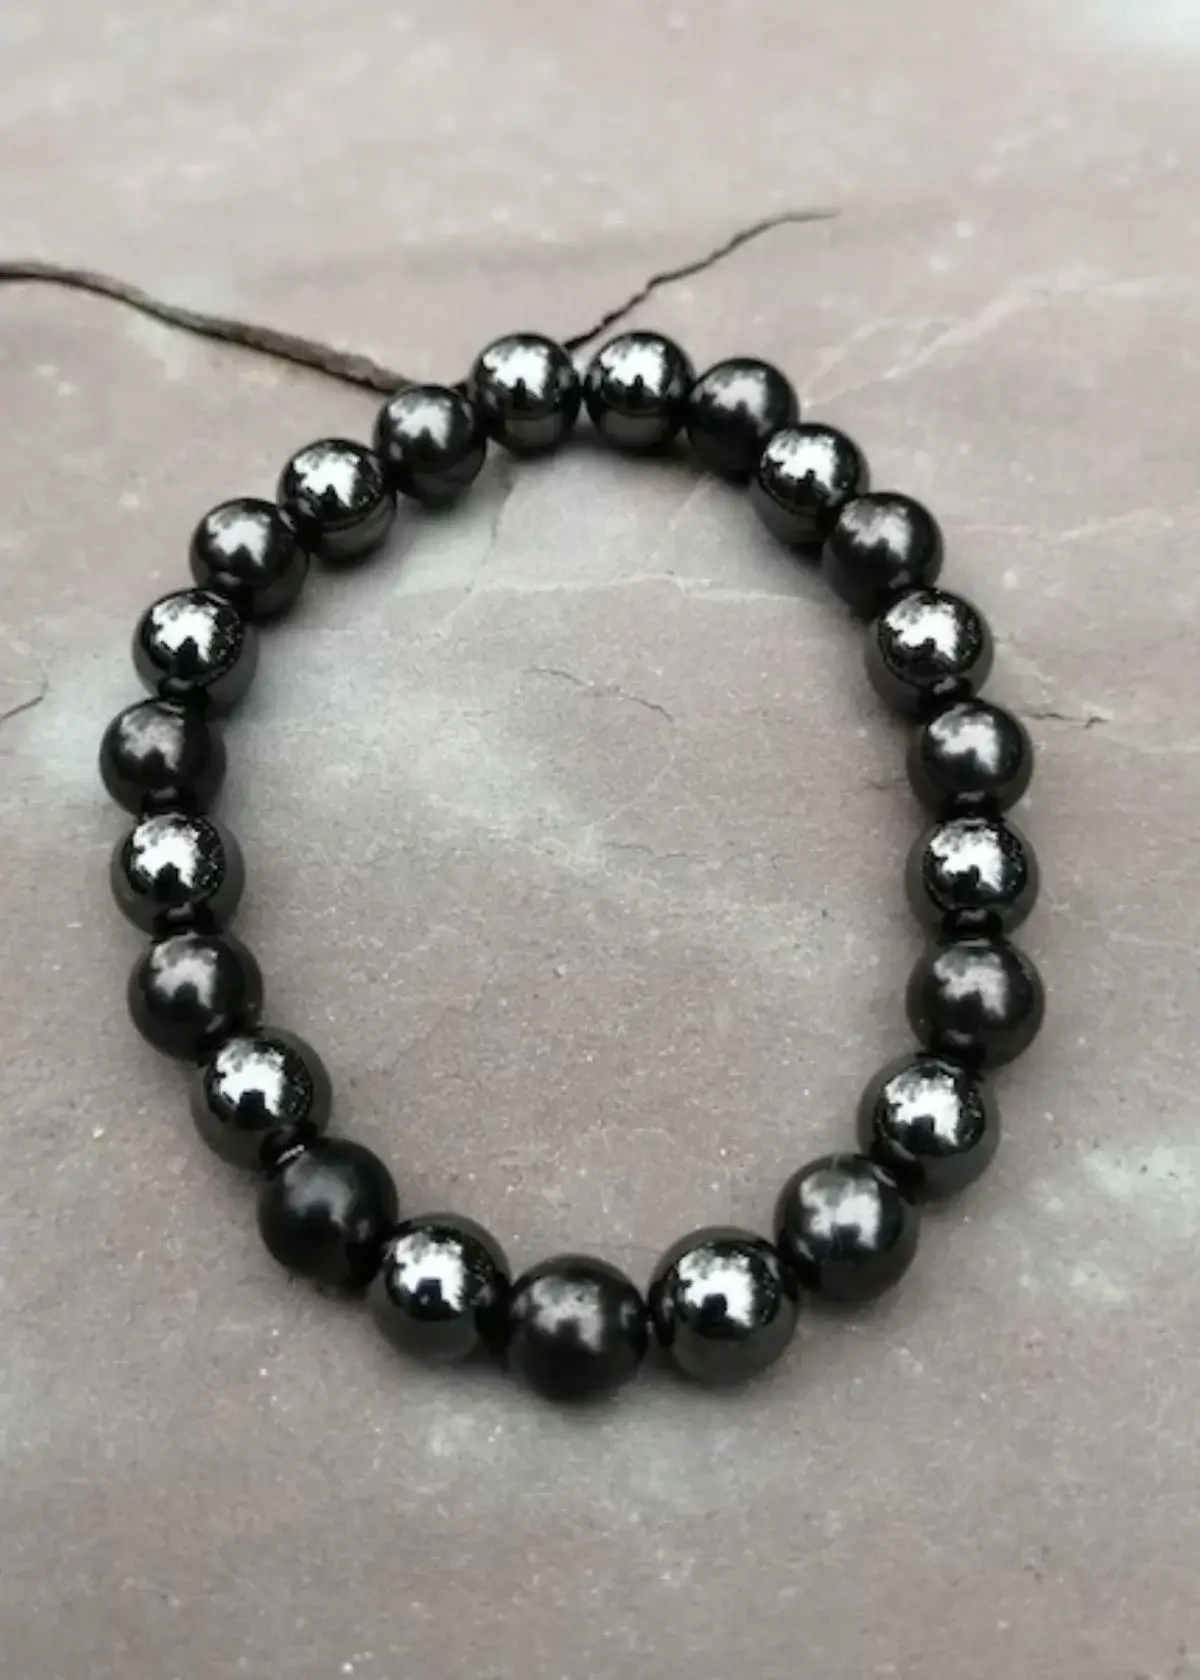 How to choose the right shungite bracelets?